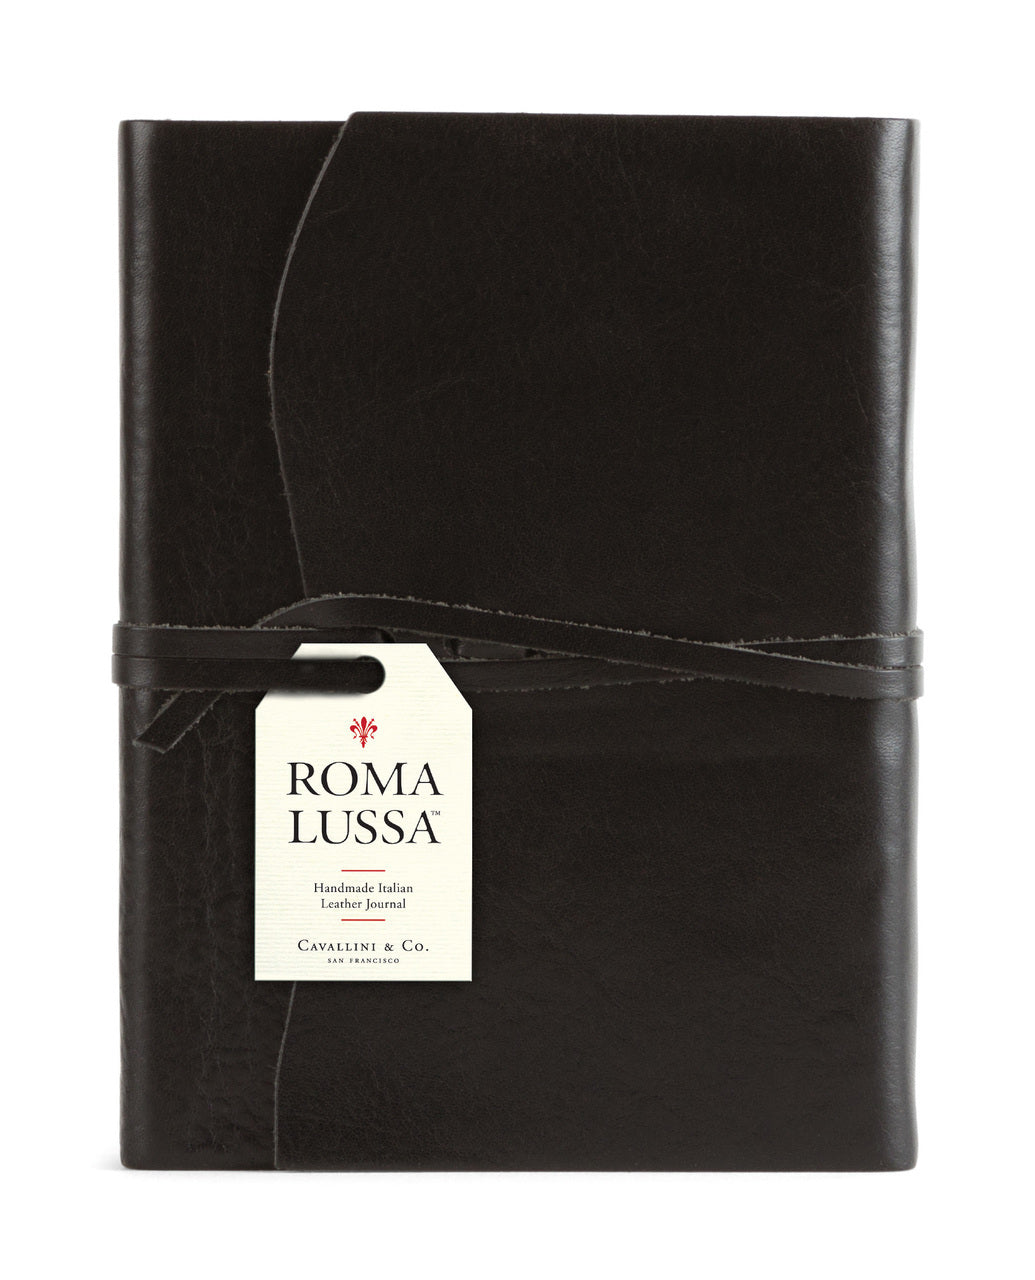 Cavallini & Co. Roma Lussa Leather Journal- 6X8 inches